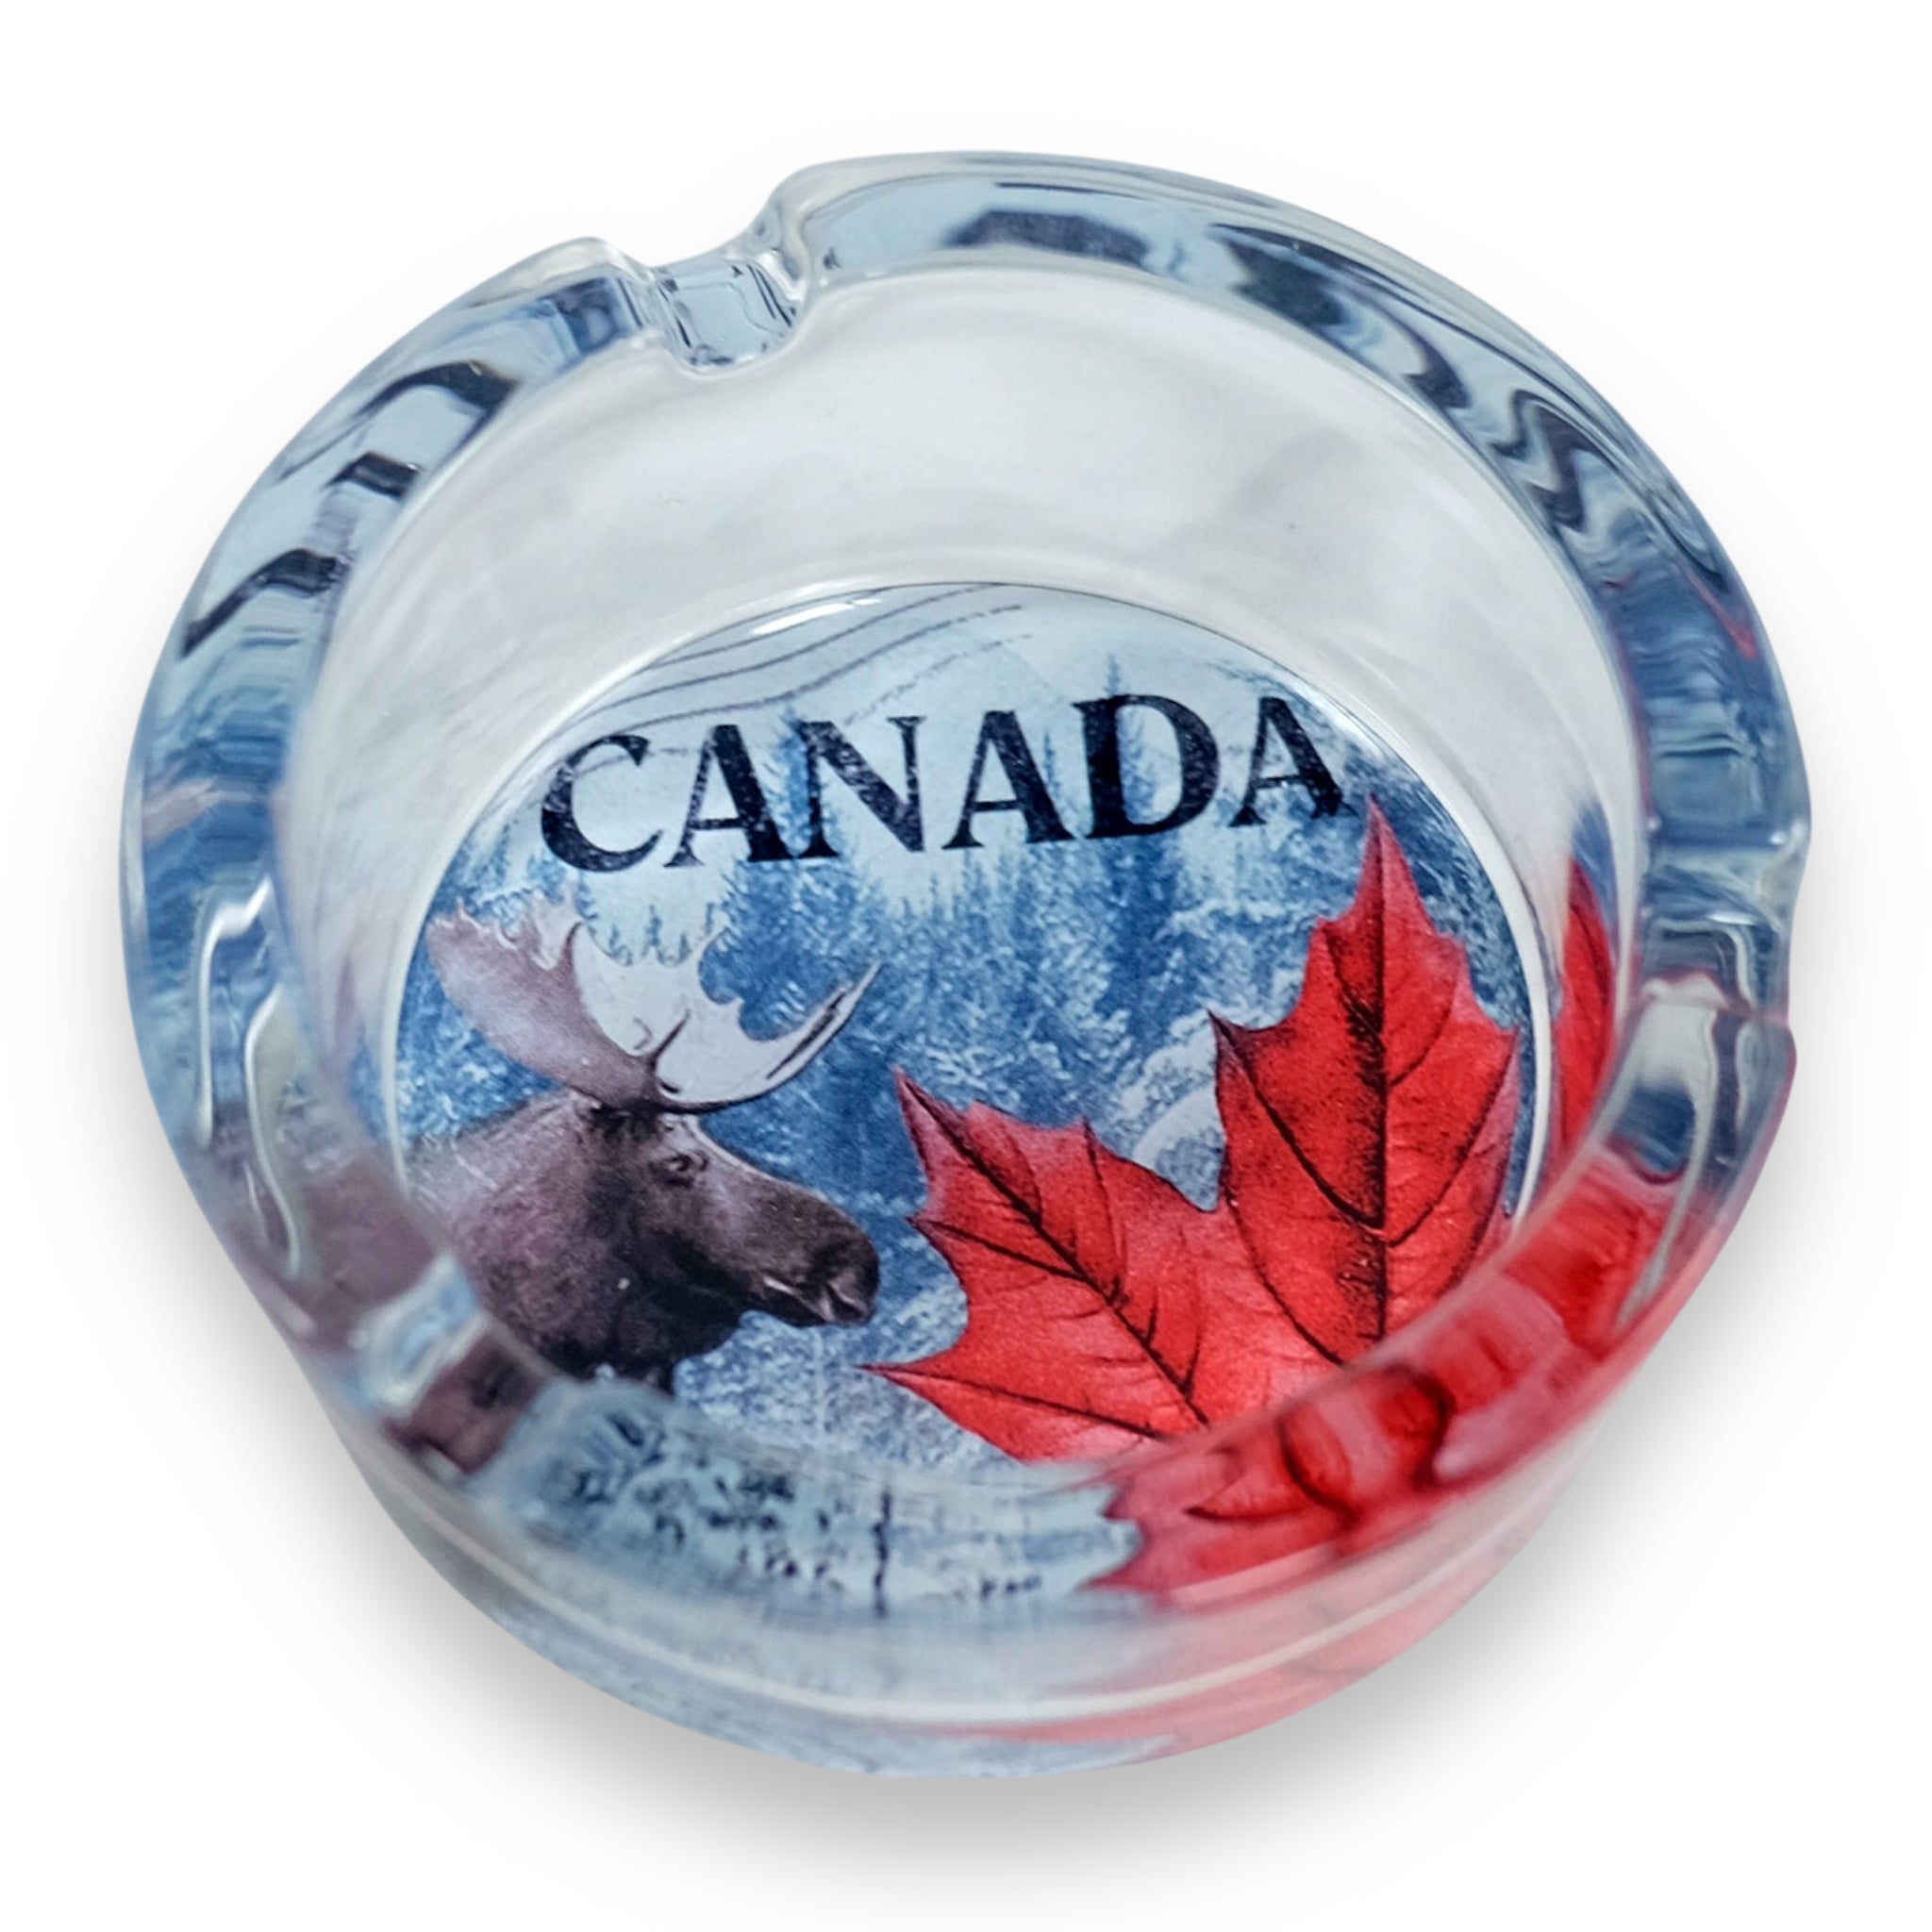 GLASS ASHTRAY CANADA MOOSE AND MAPLE LEAF THEMED